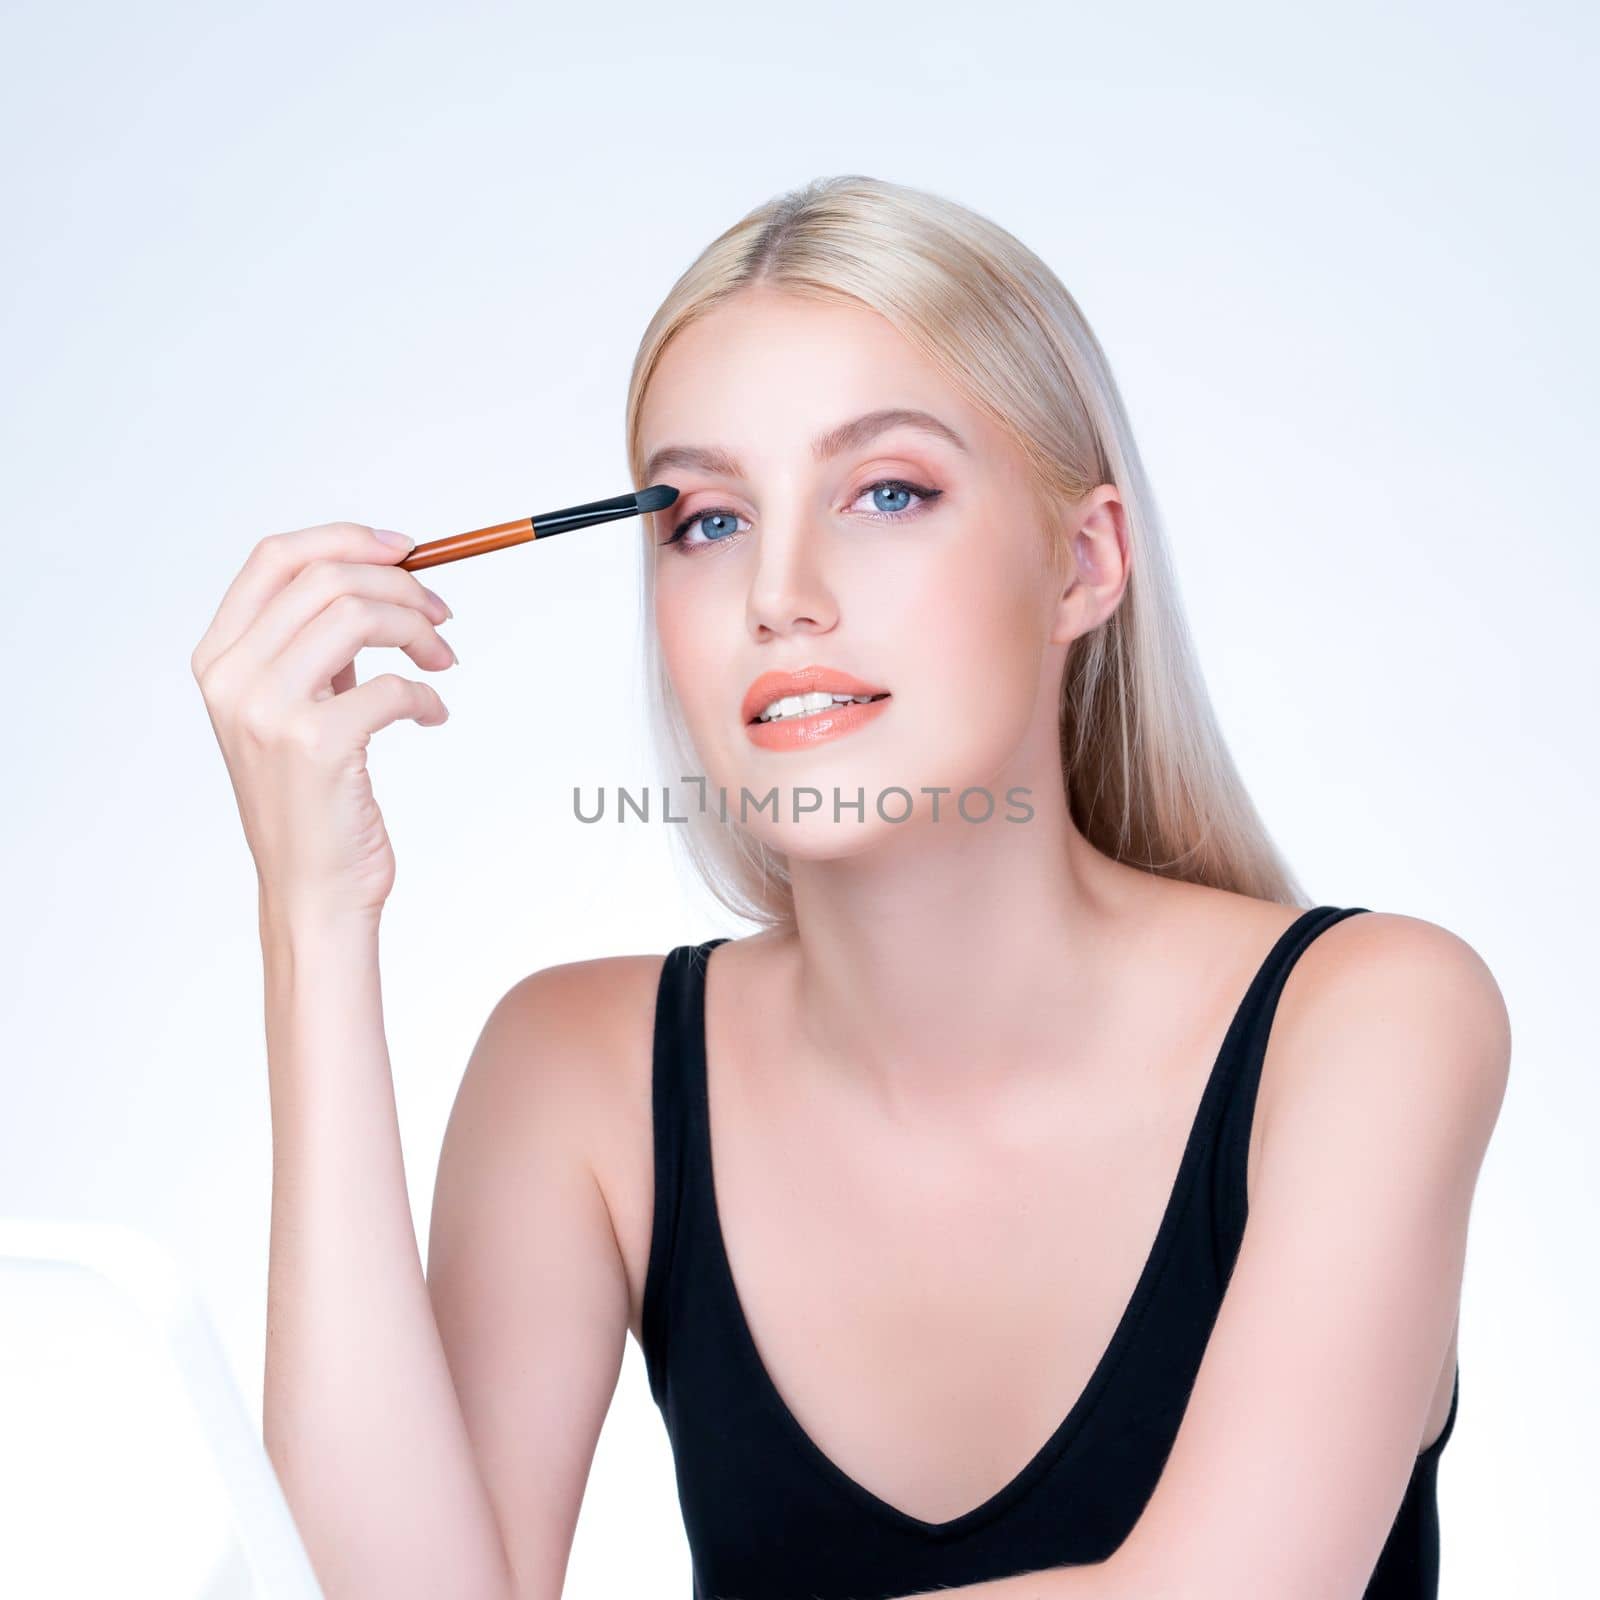 Beautiful personable girl with flawless applying eye shadow makeup with eyeliner brush. Cosmetic facial painting process on lovely young woman with perfect clean skin in isolated background.